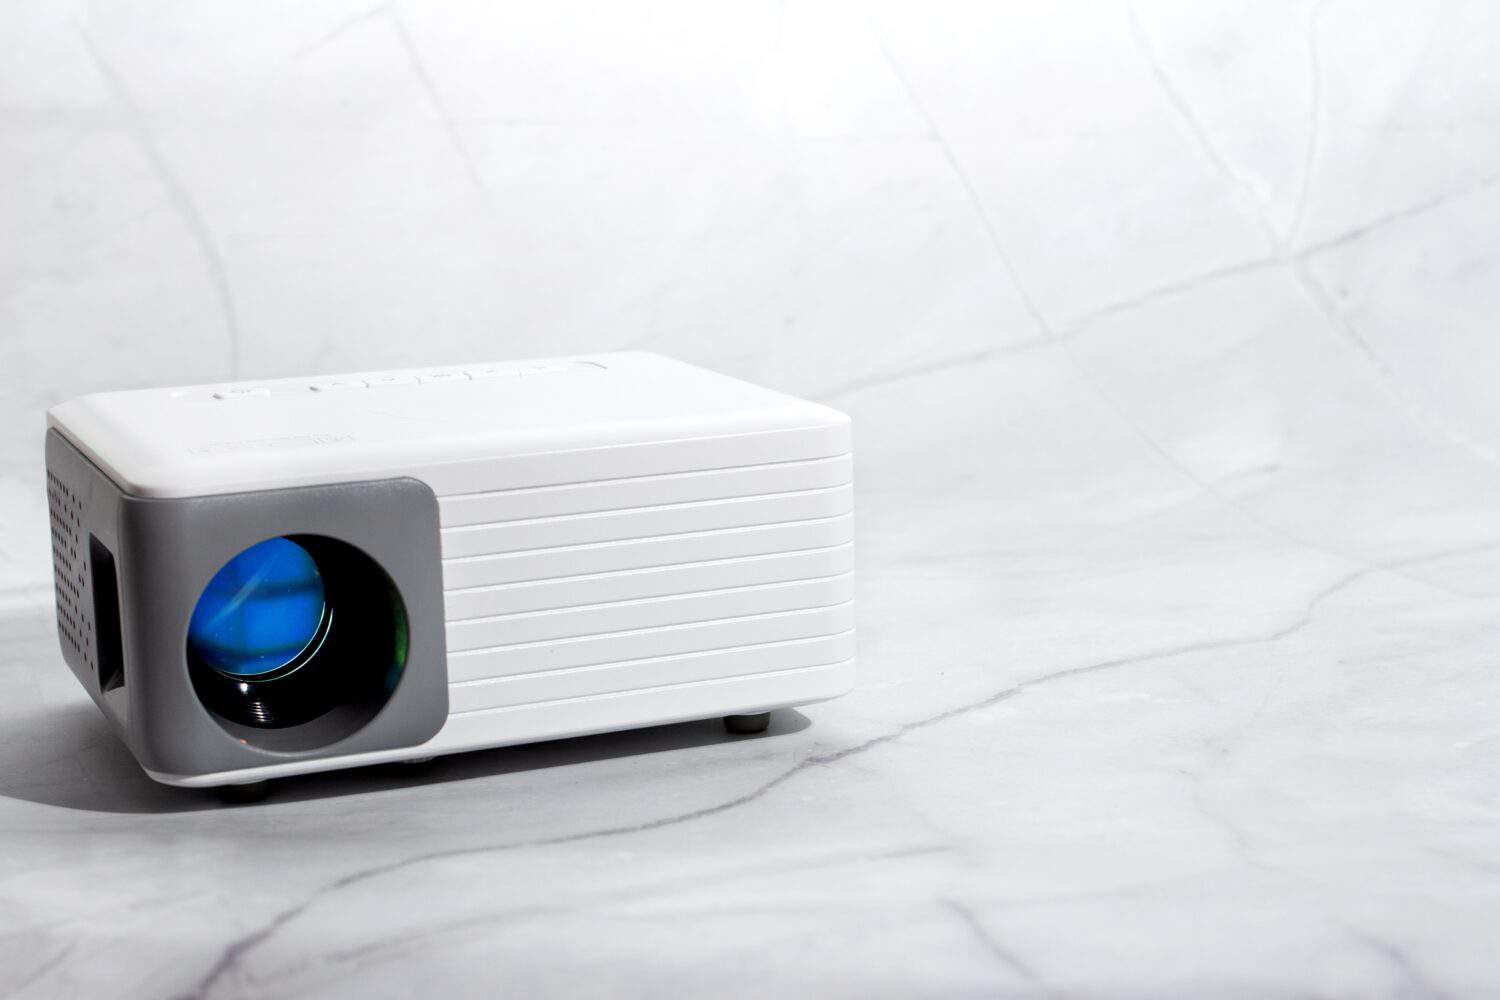 7 Reasons to Buy a Portable Projector